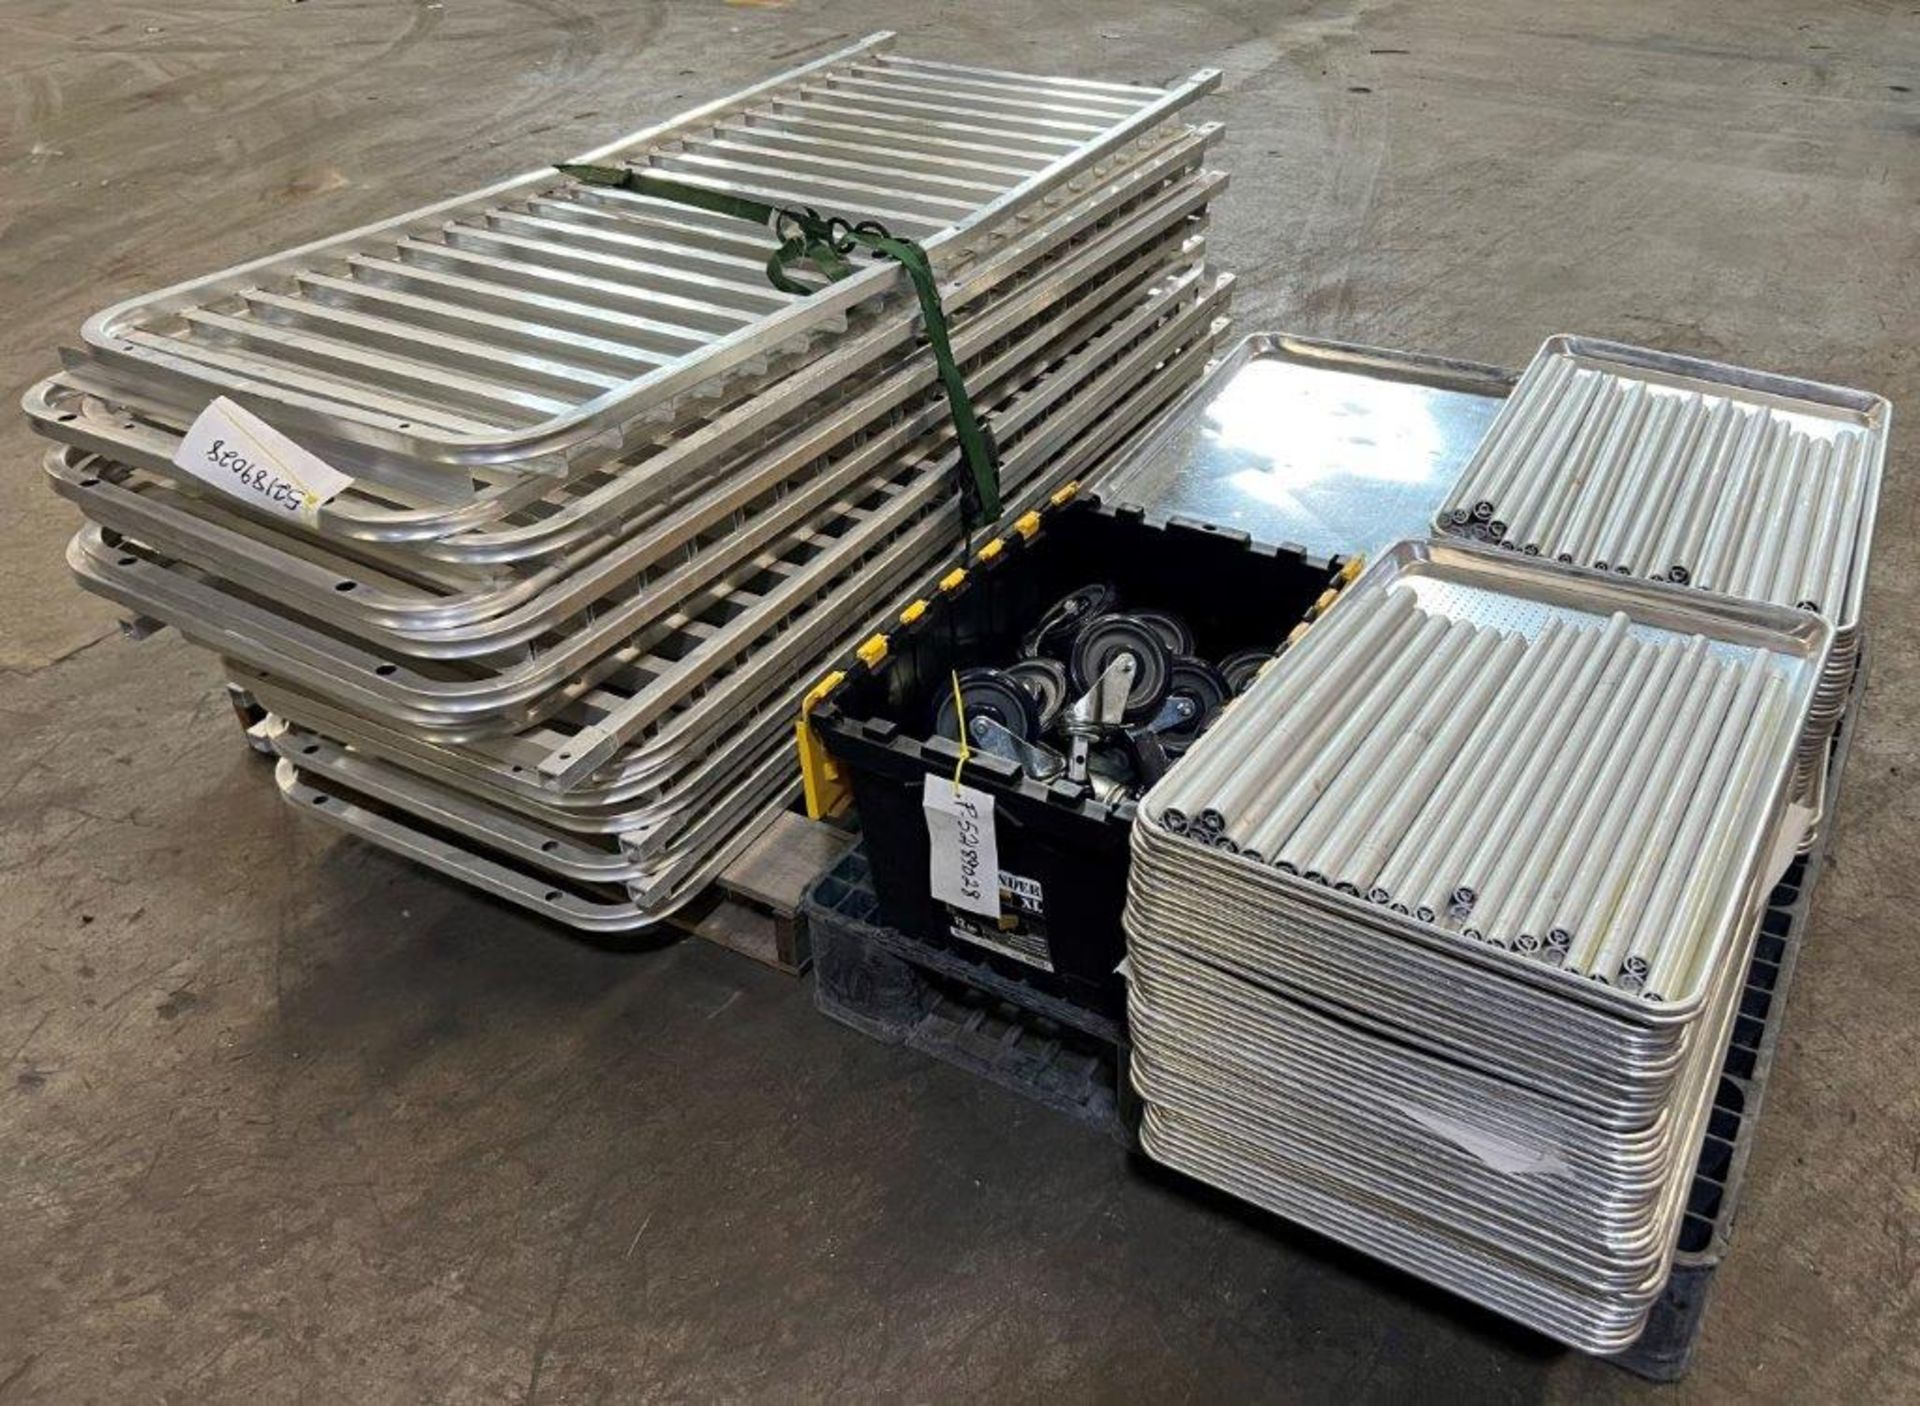 Lot Of Regency Commercial Aluminum Bakery Racks. Includes casters, and trays.Item#52189028 ~